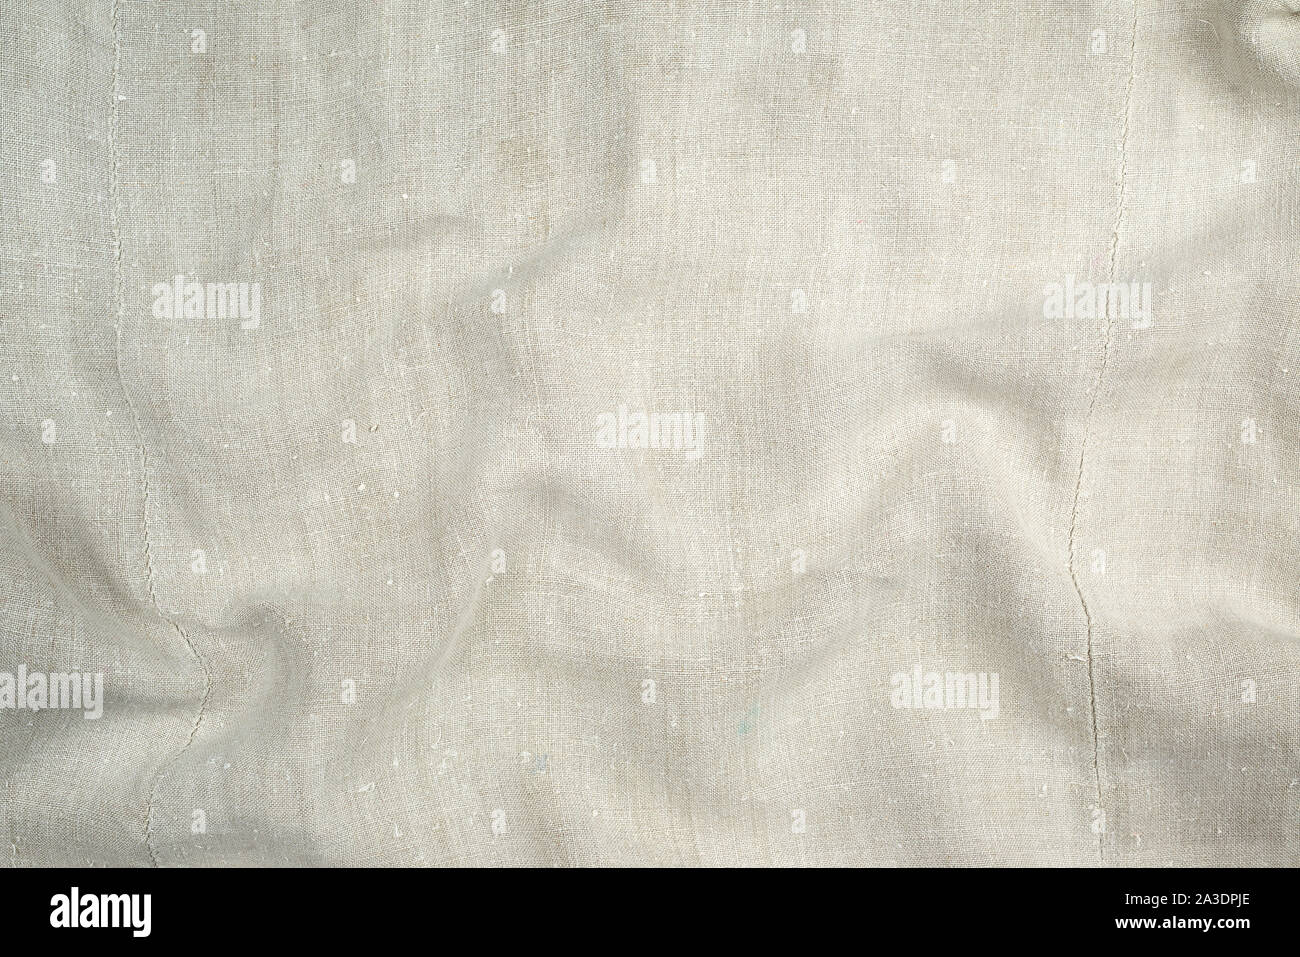 Homespun fabric with a rough texture surface pattern. Close up Stock Photo  - Alamy